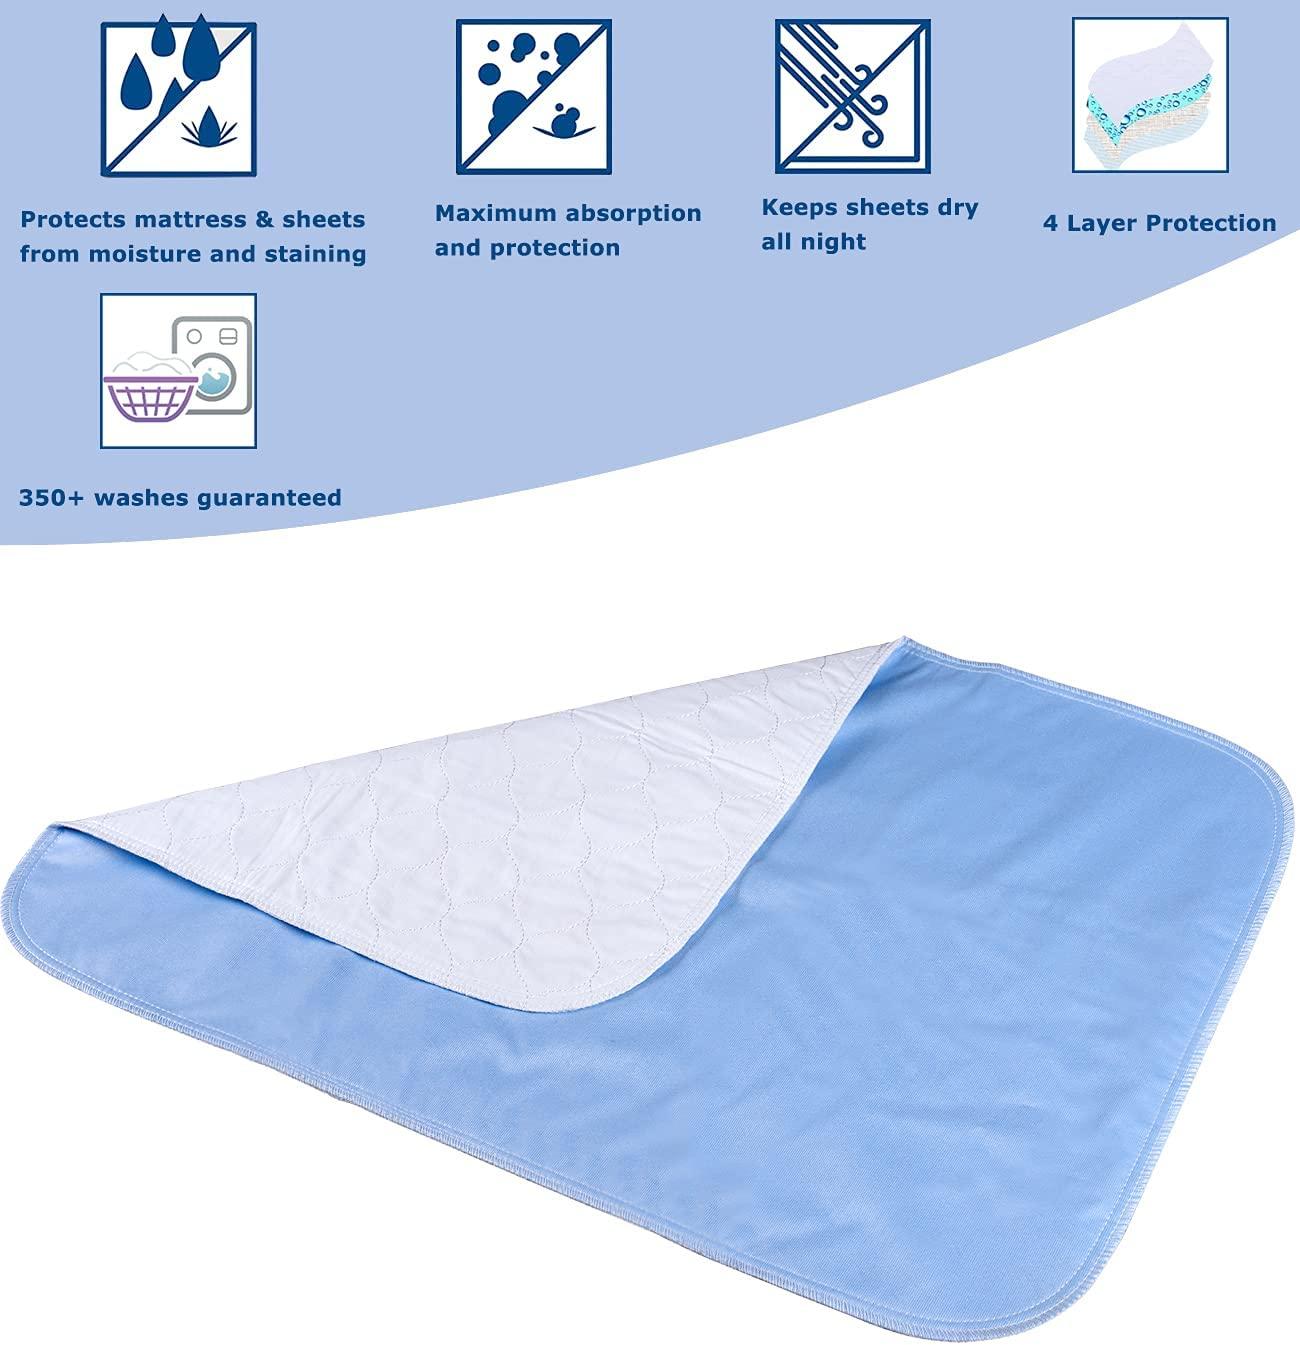 Washable Waterproof Incontinent Pads - Flat Style